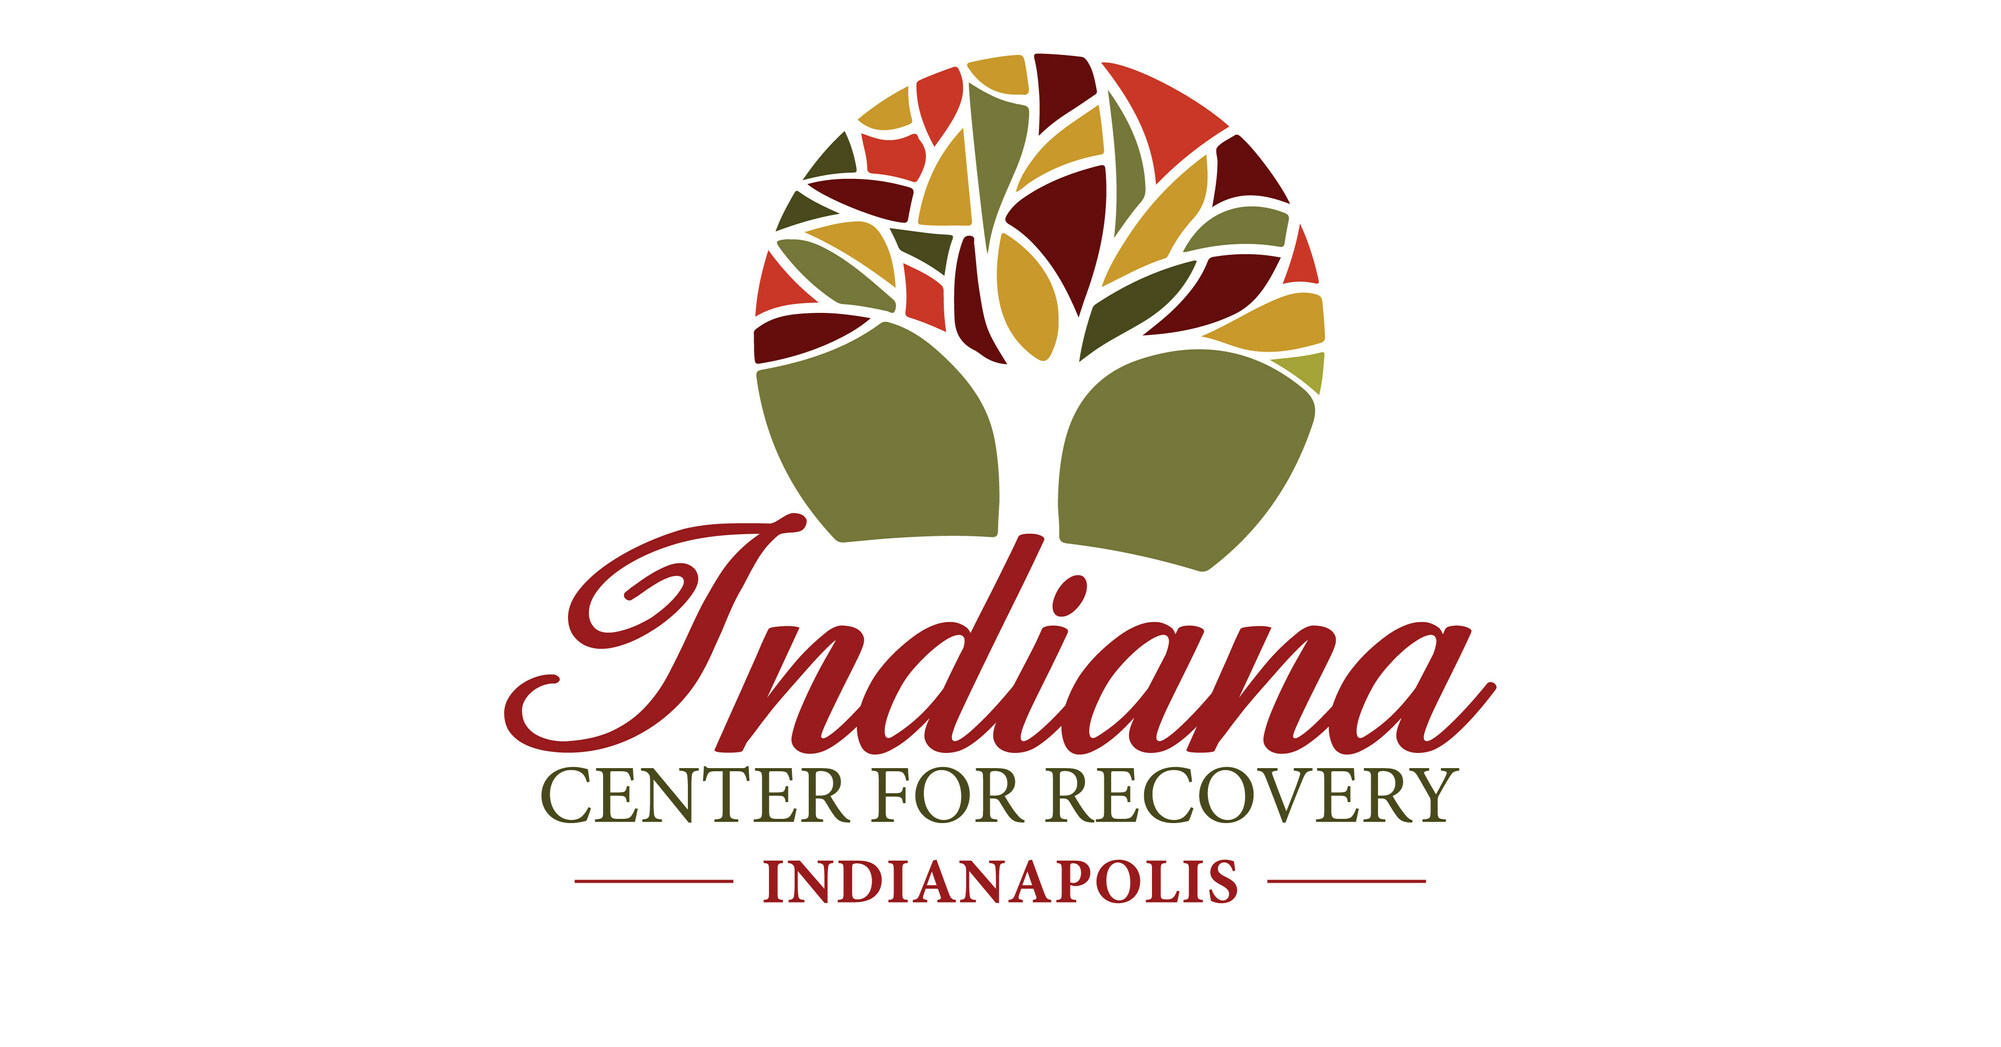 INDIANA CENTER FOR RECOVERY INDIANAPOLIS ANNOUNCES NEW IN-NETWORK PARTNERSHIP WITH ANTHEM BLUE CROSS BLUE SHIELD